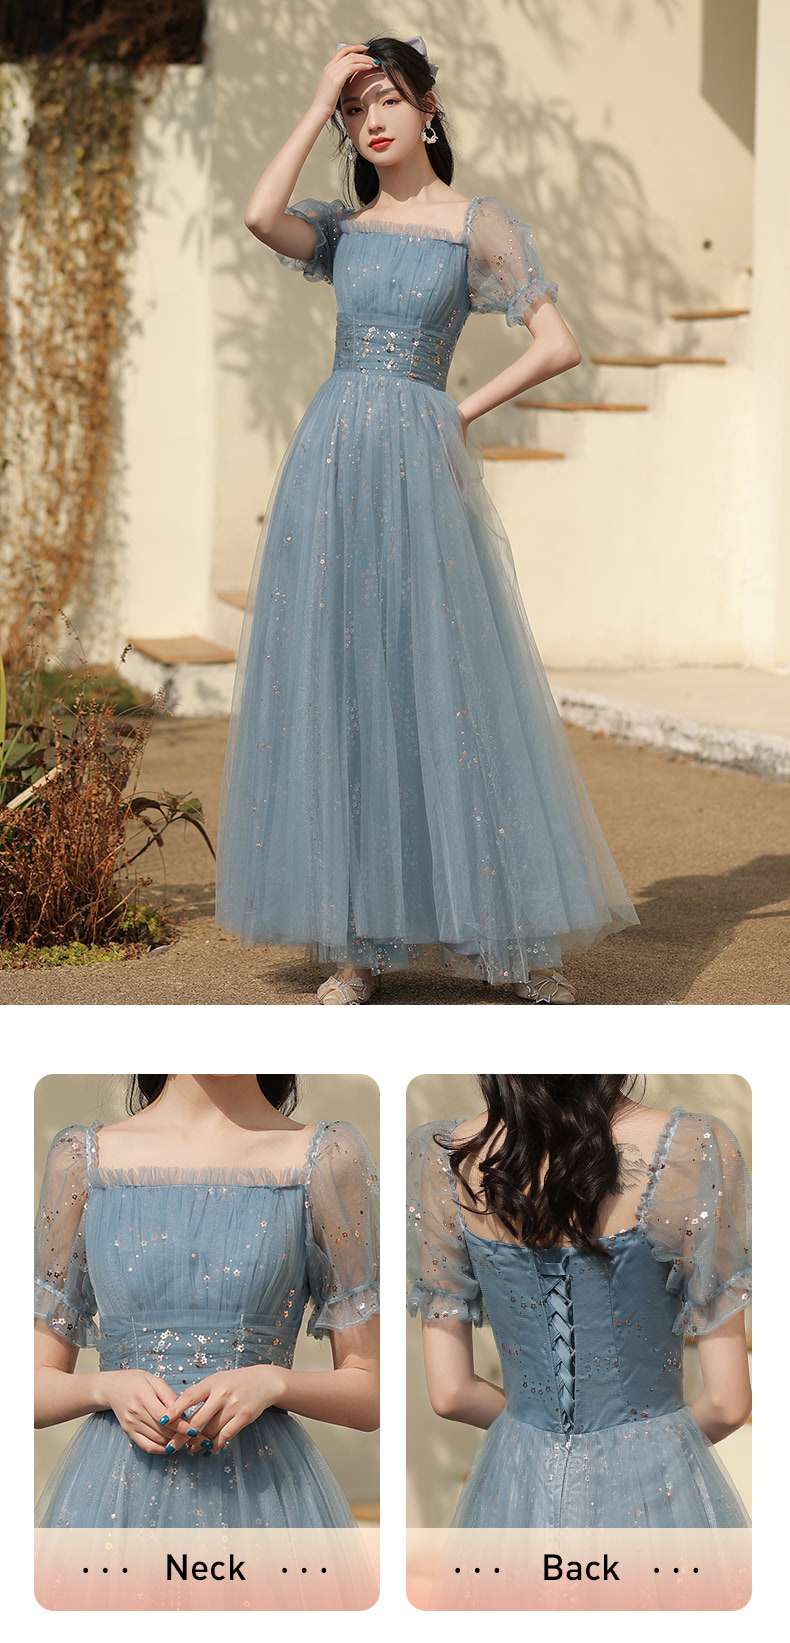 Blue-Bridesmaid-Dress-Wedding-Female-Guest-Gown-with-4-Styles22.jpg